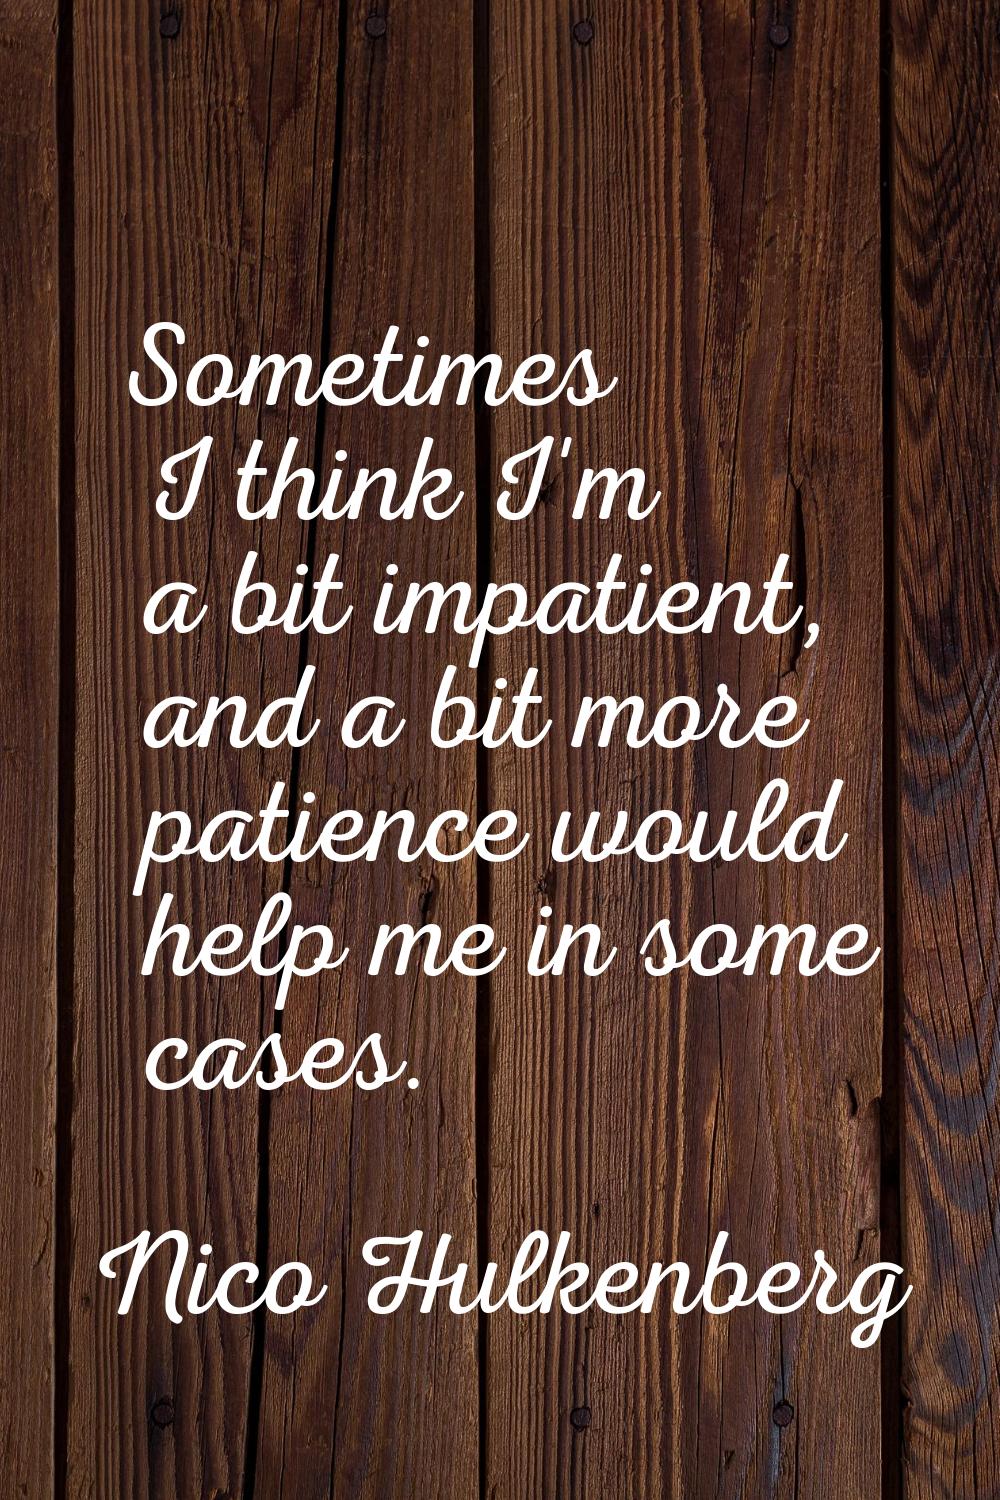 Sometimes I think I'm a bit impatient, and a bit more patience would help me in some cases.